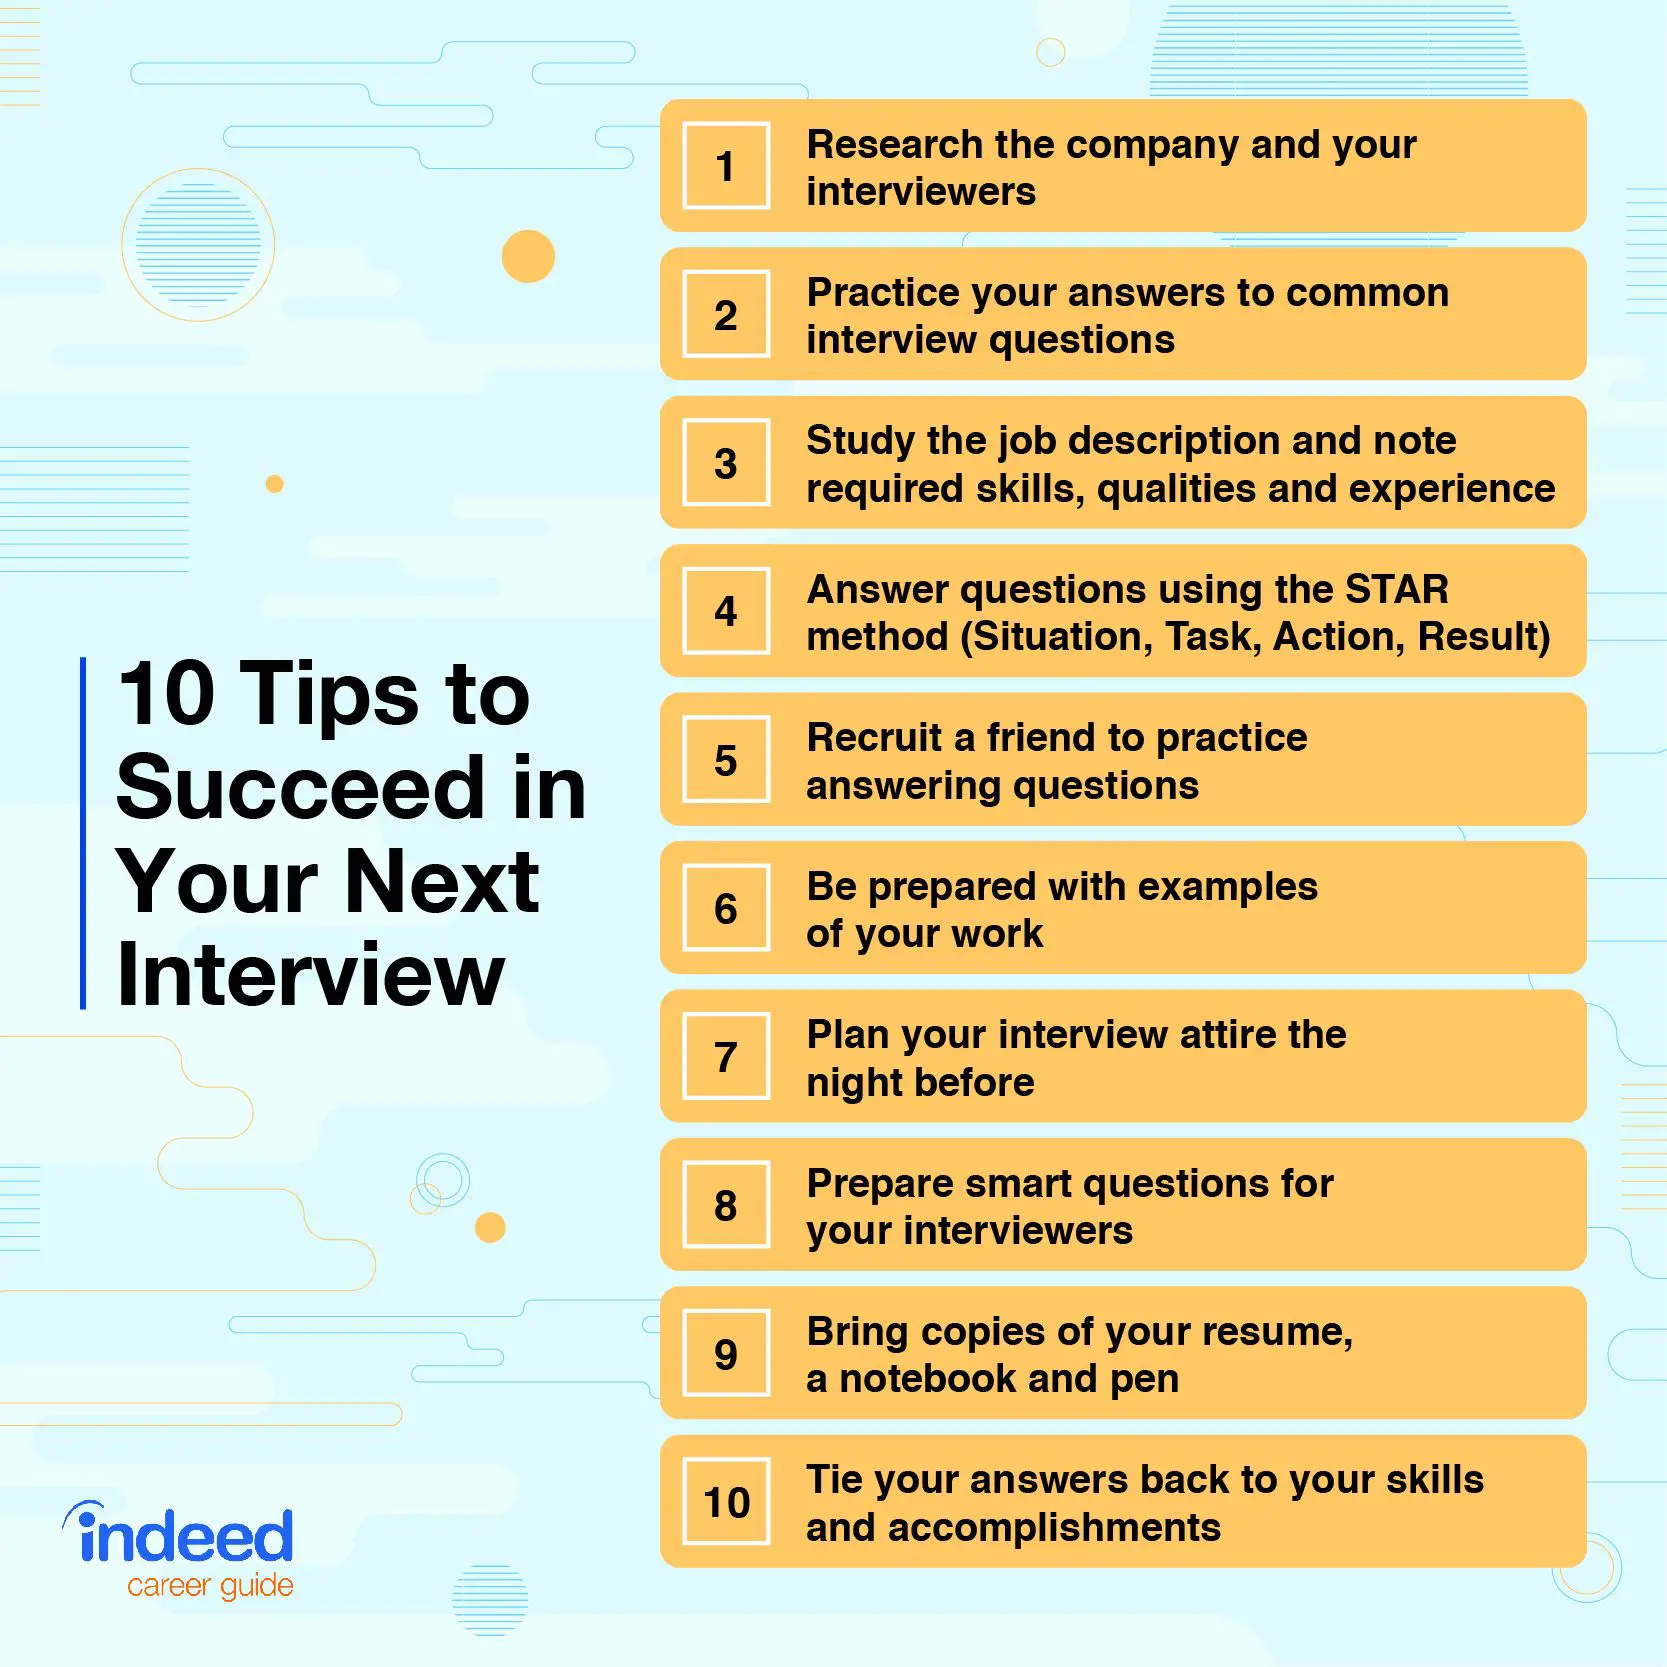 How to Succeed at a Hiring Event or Open Interview in 2021